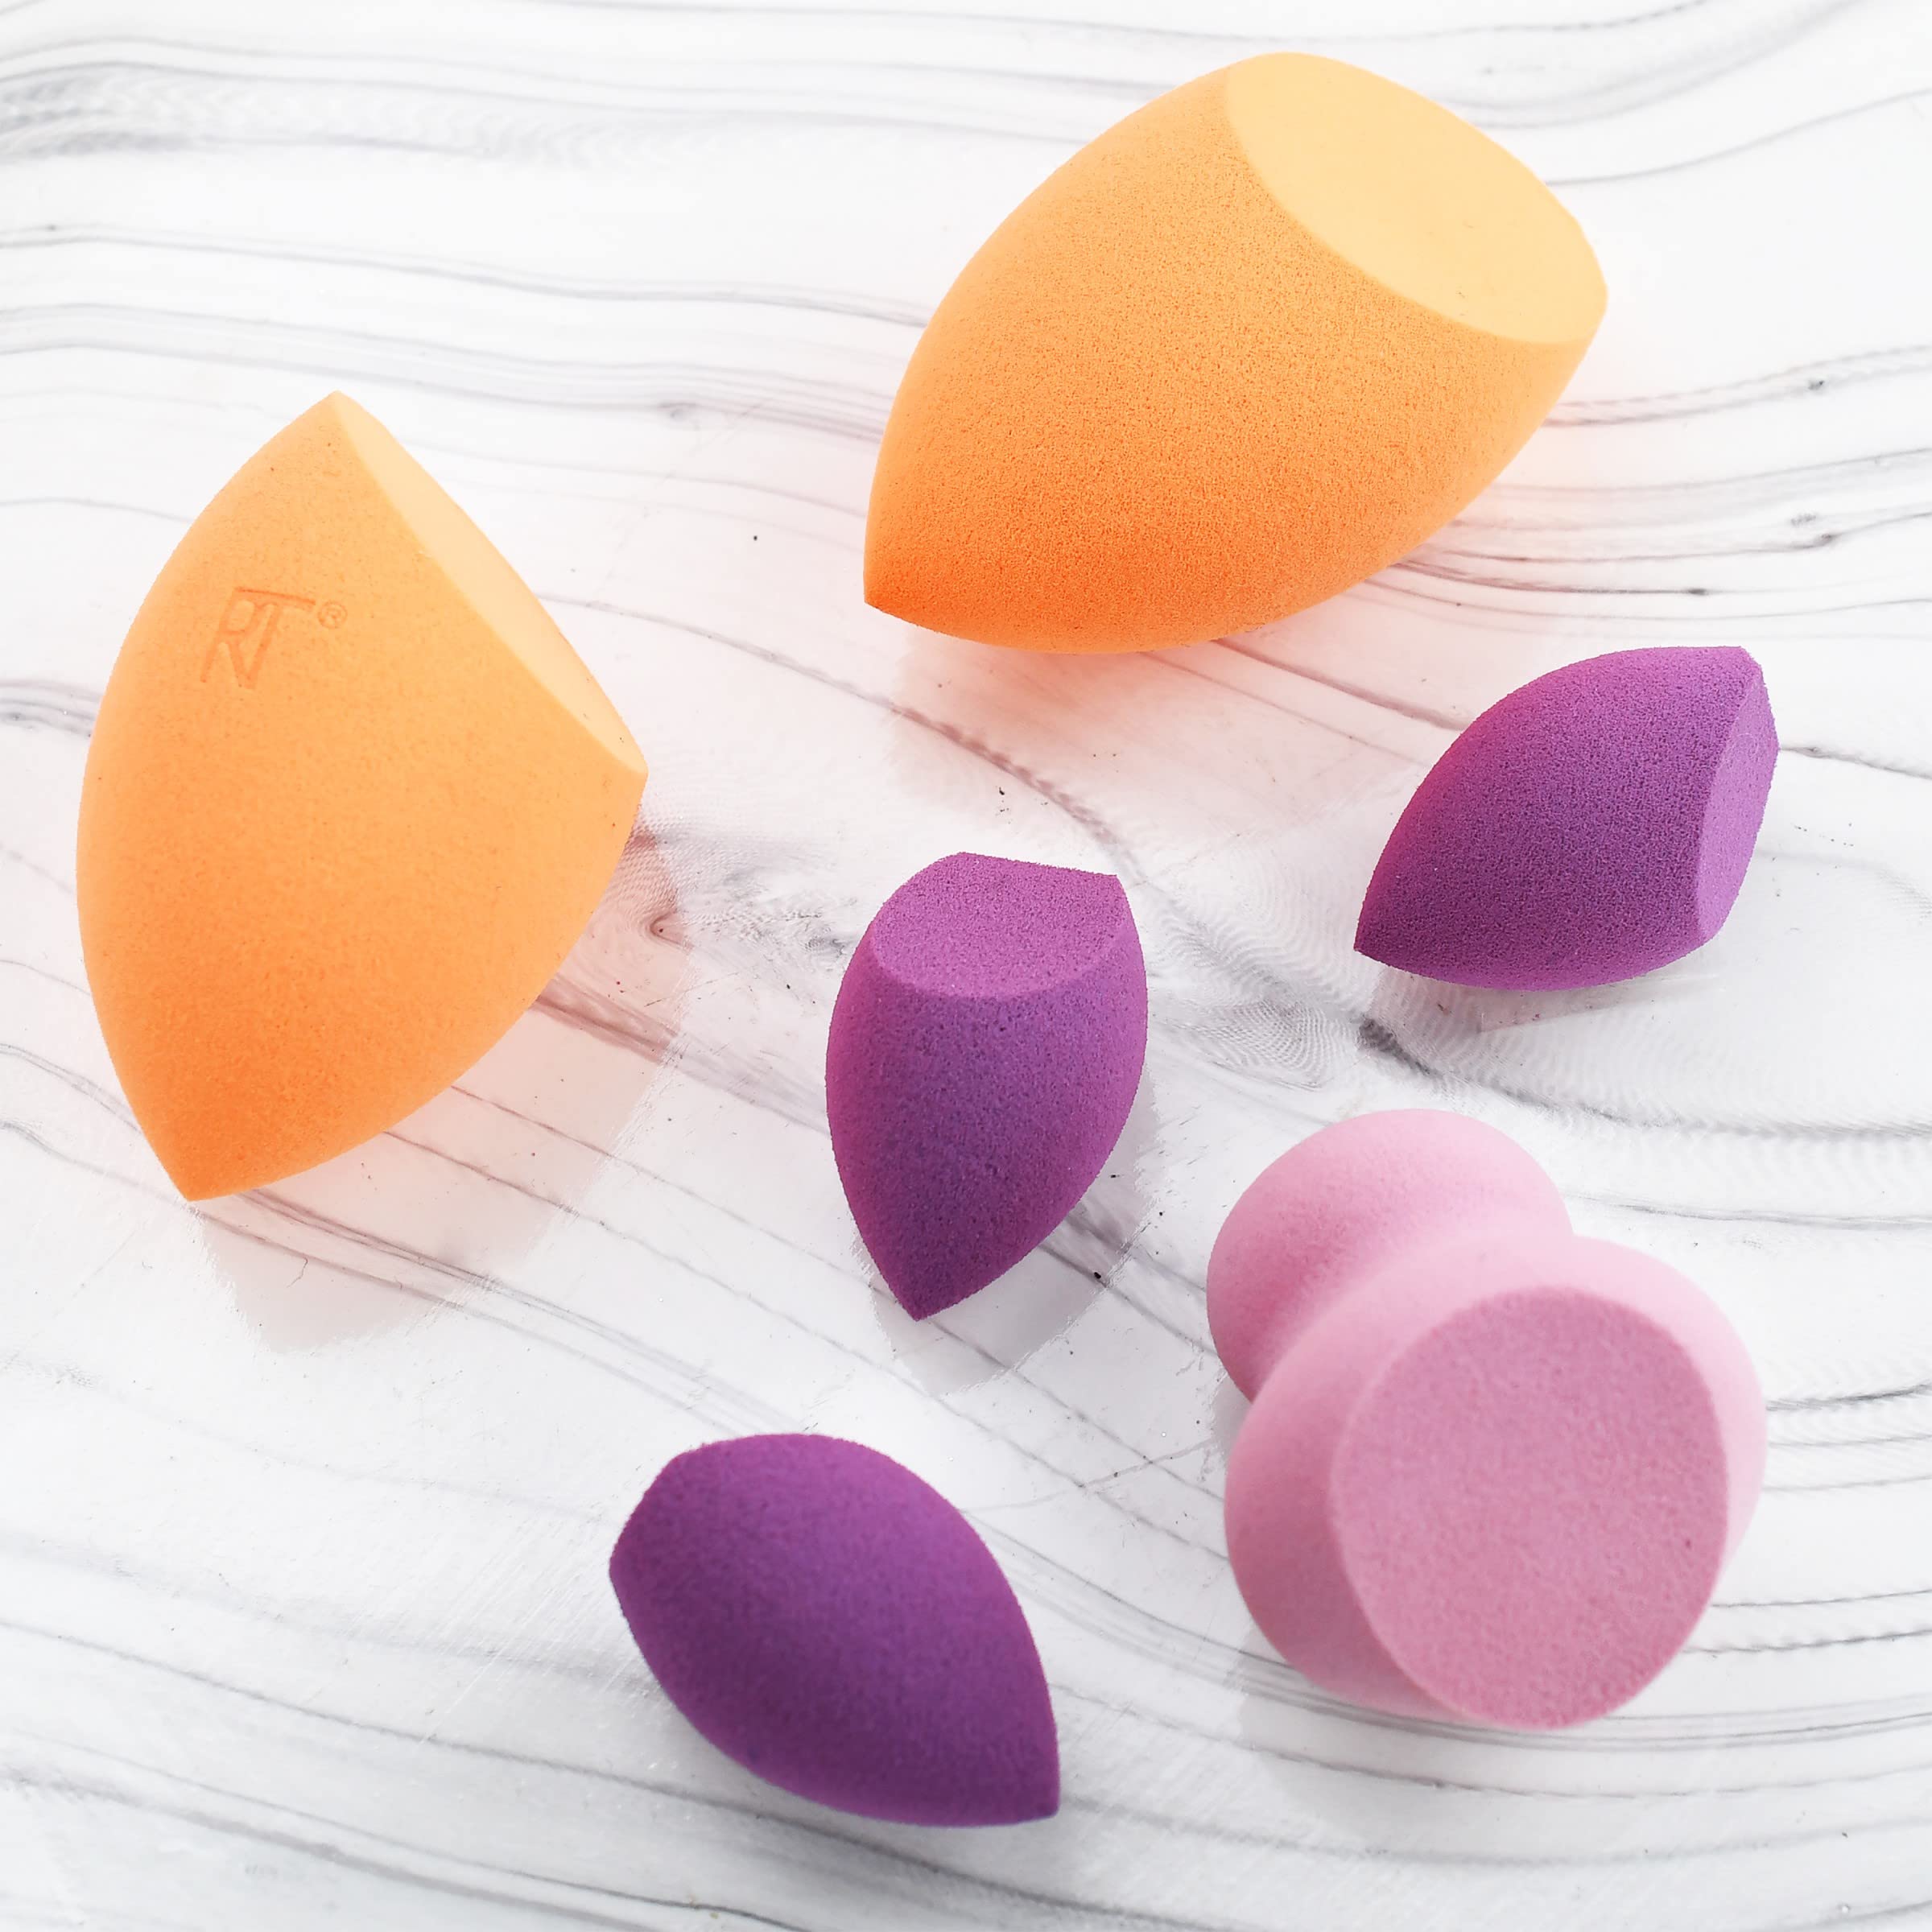 Real Techniques Miracle Complexion Assorted Beauty Sponges Makeup Blender, For Blending & Sculpting, Full Coverage, Professional Makeup Tool, Cruelty Free, Vegan, Latex Free, 6 Piece Sponge Set